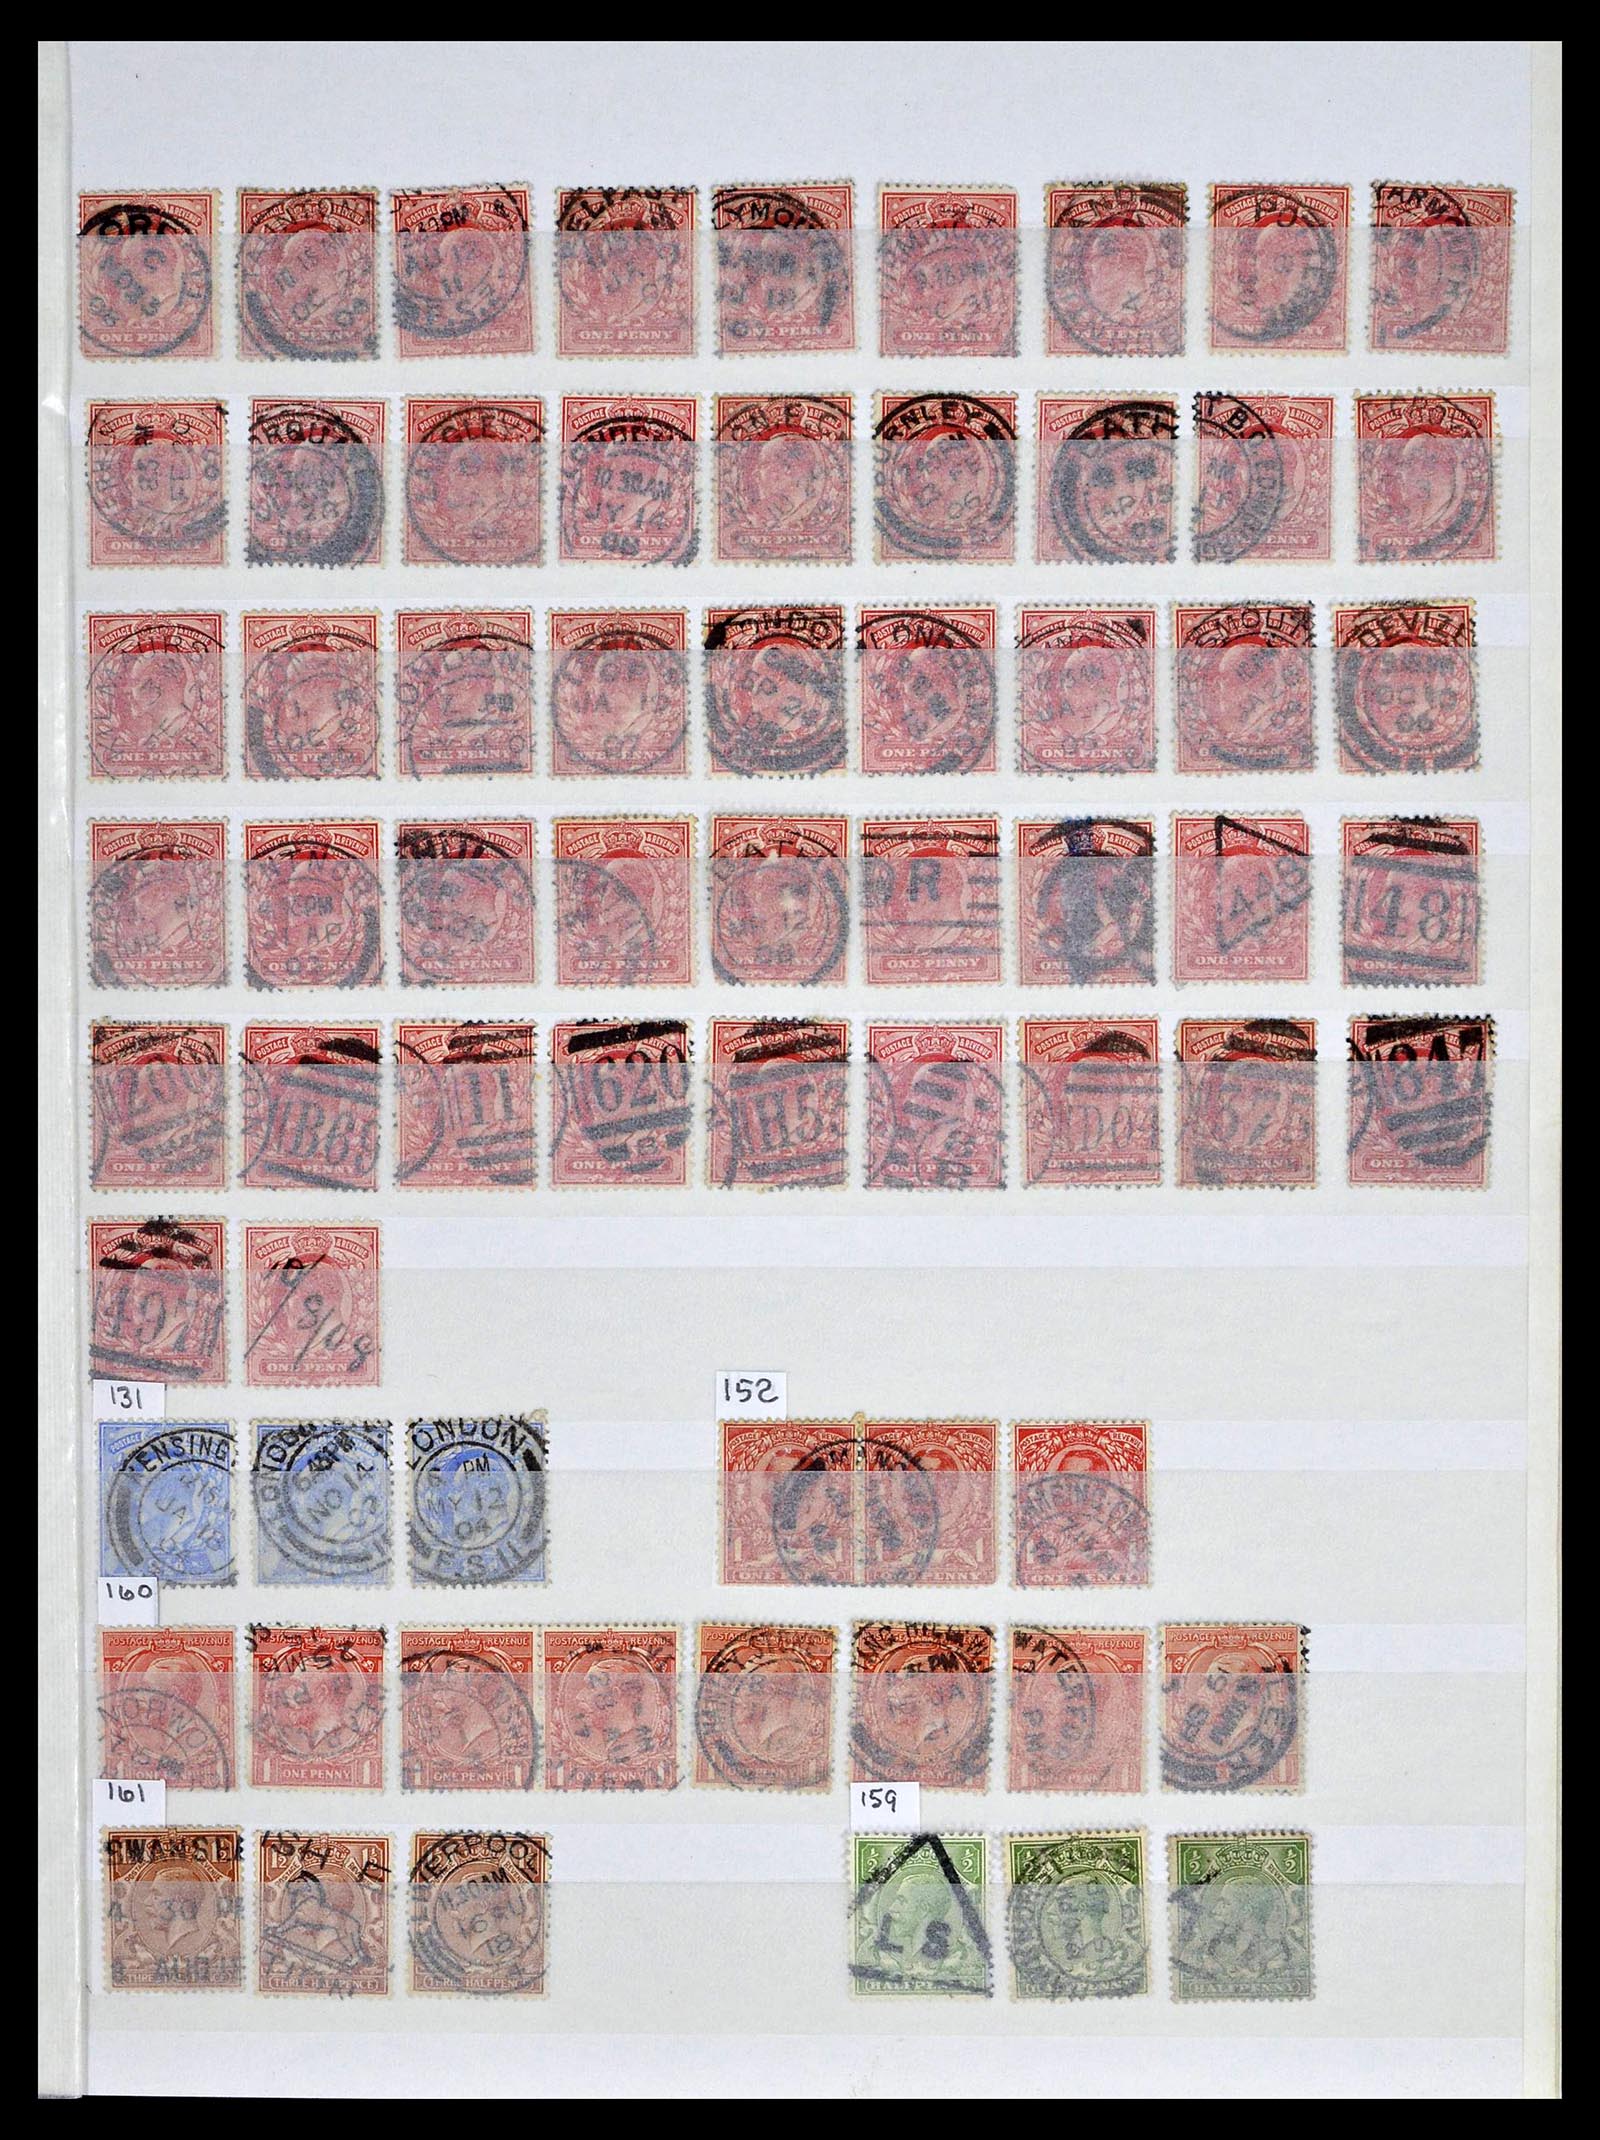 39196 0107 - Stamp collection 39196 Great Britain 1844-1955.